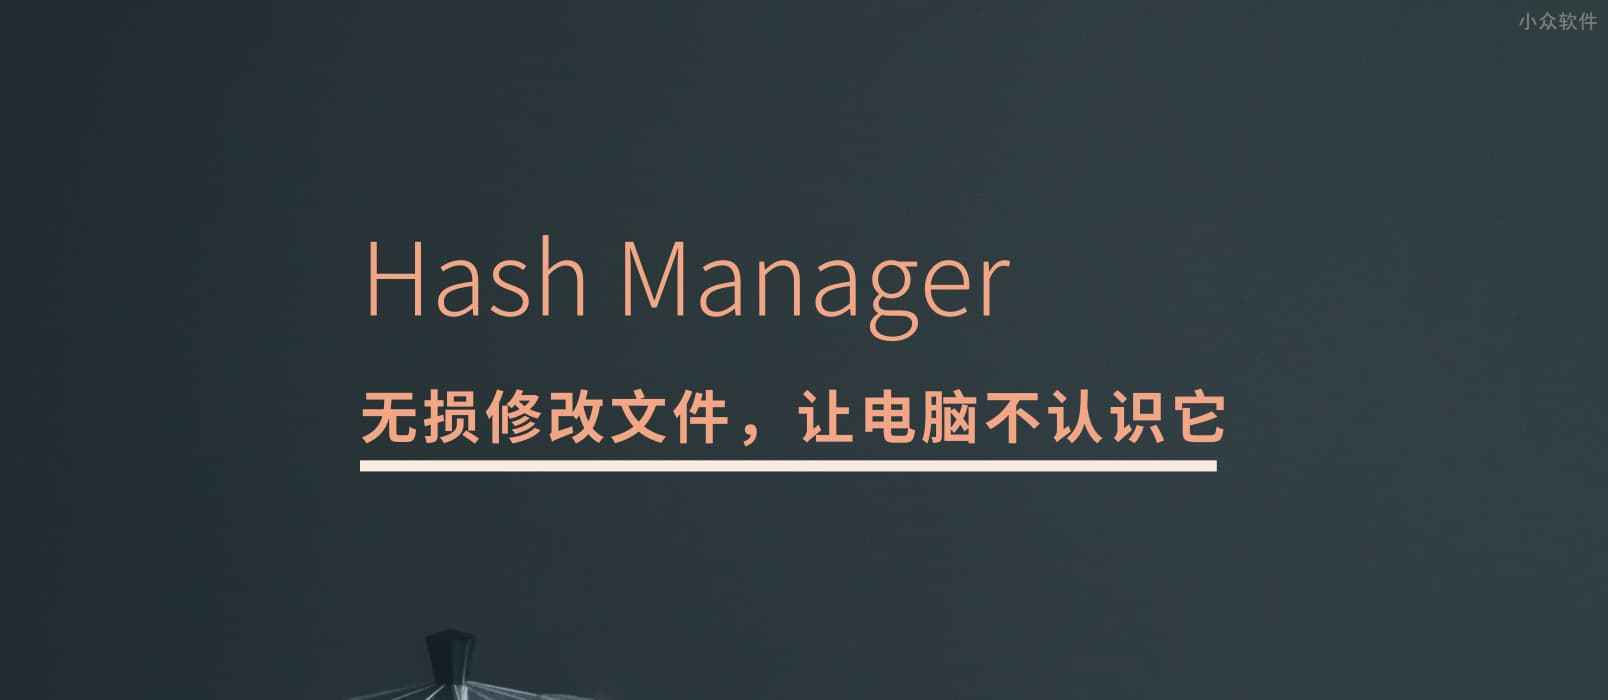 Hash Manager – 批量修改任意文件的哈希值（MD5）[Win]